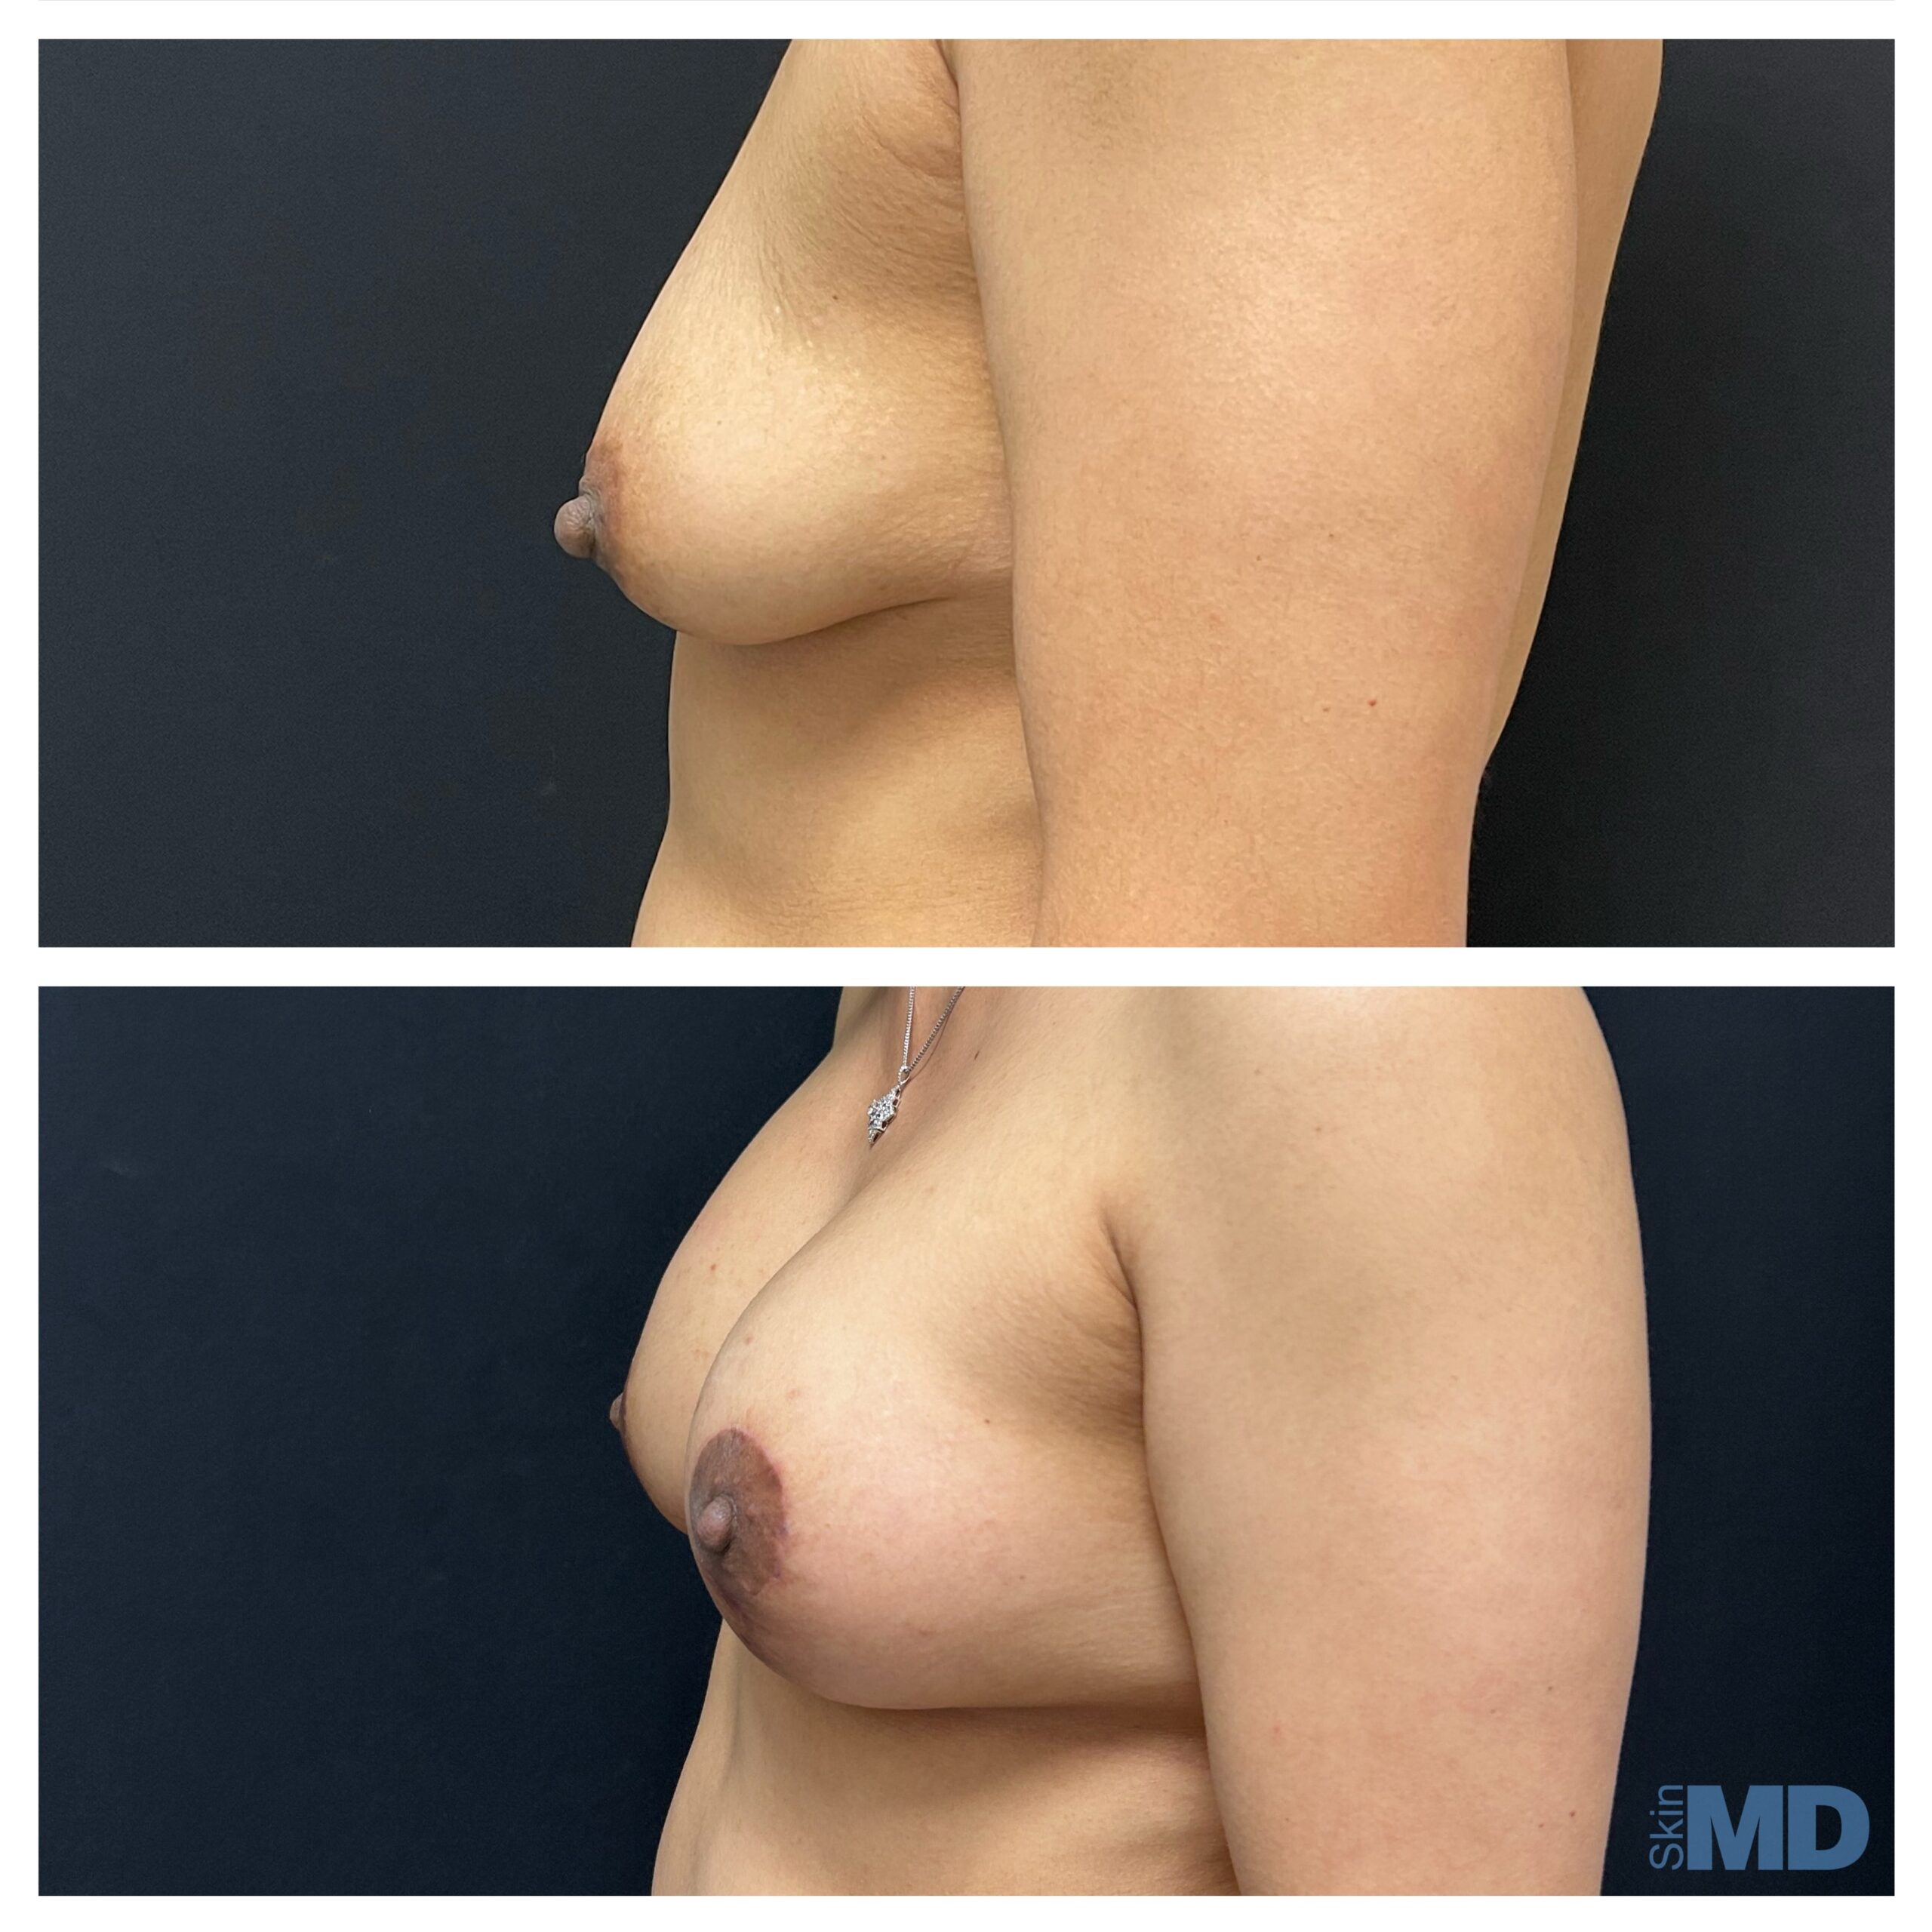 Before and after breast lift results